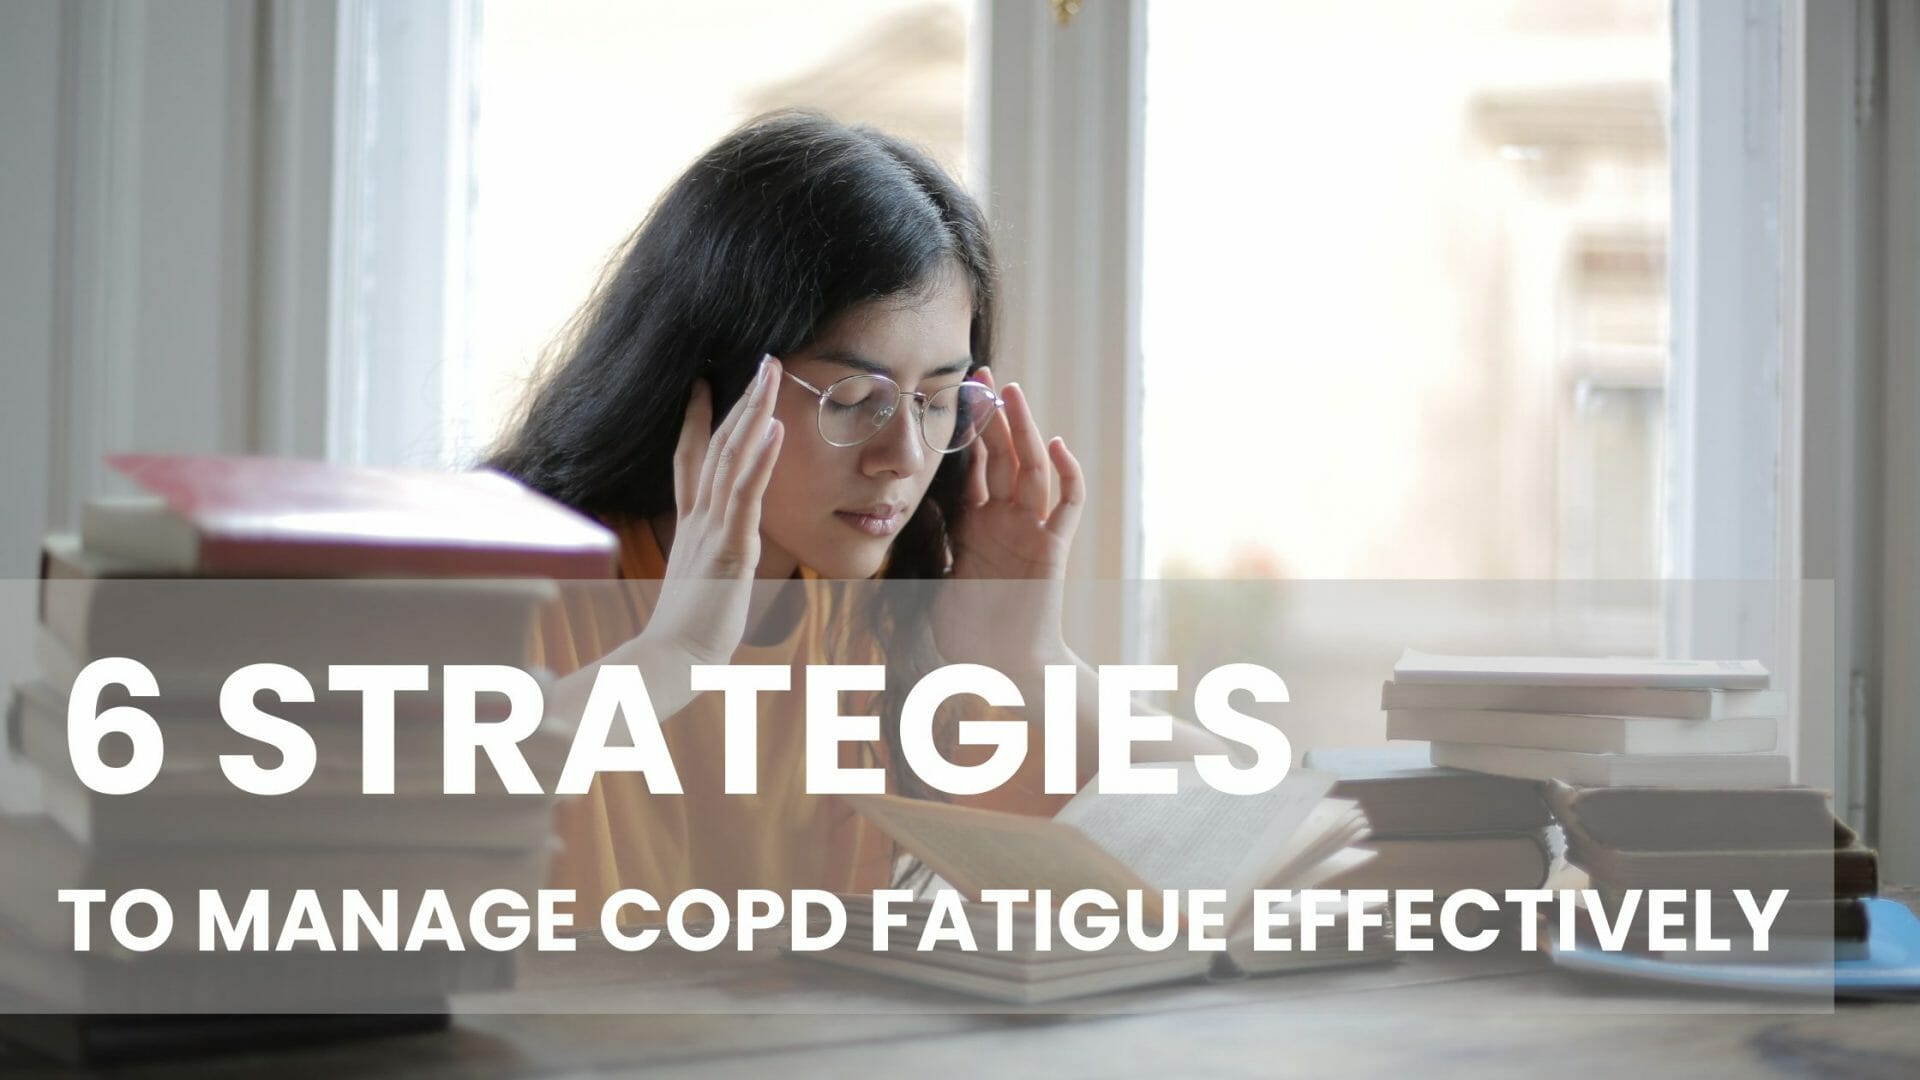 Strategies to manage COPD